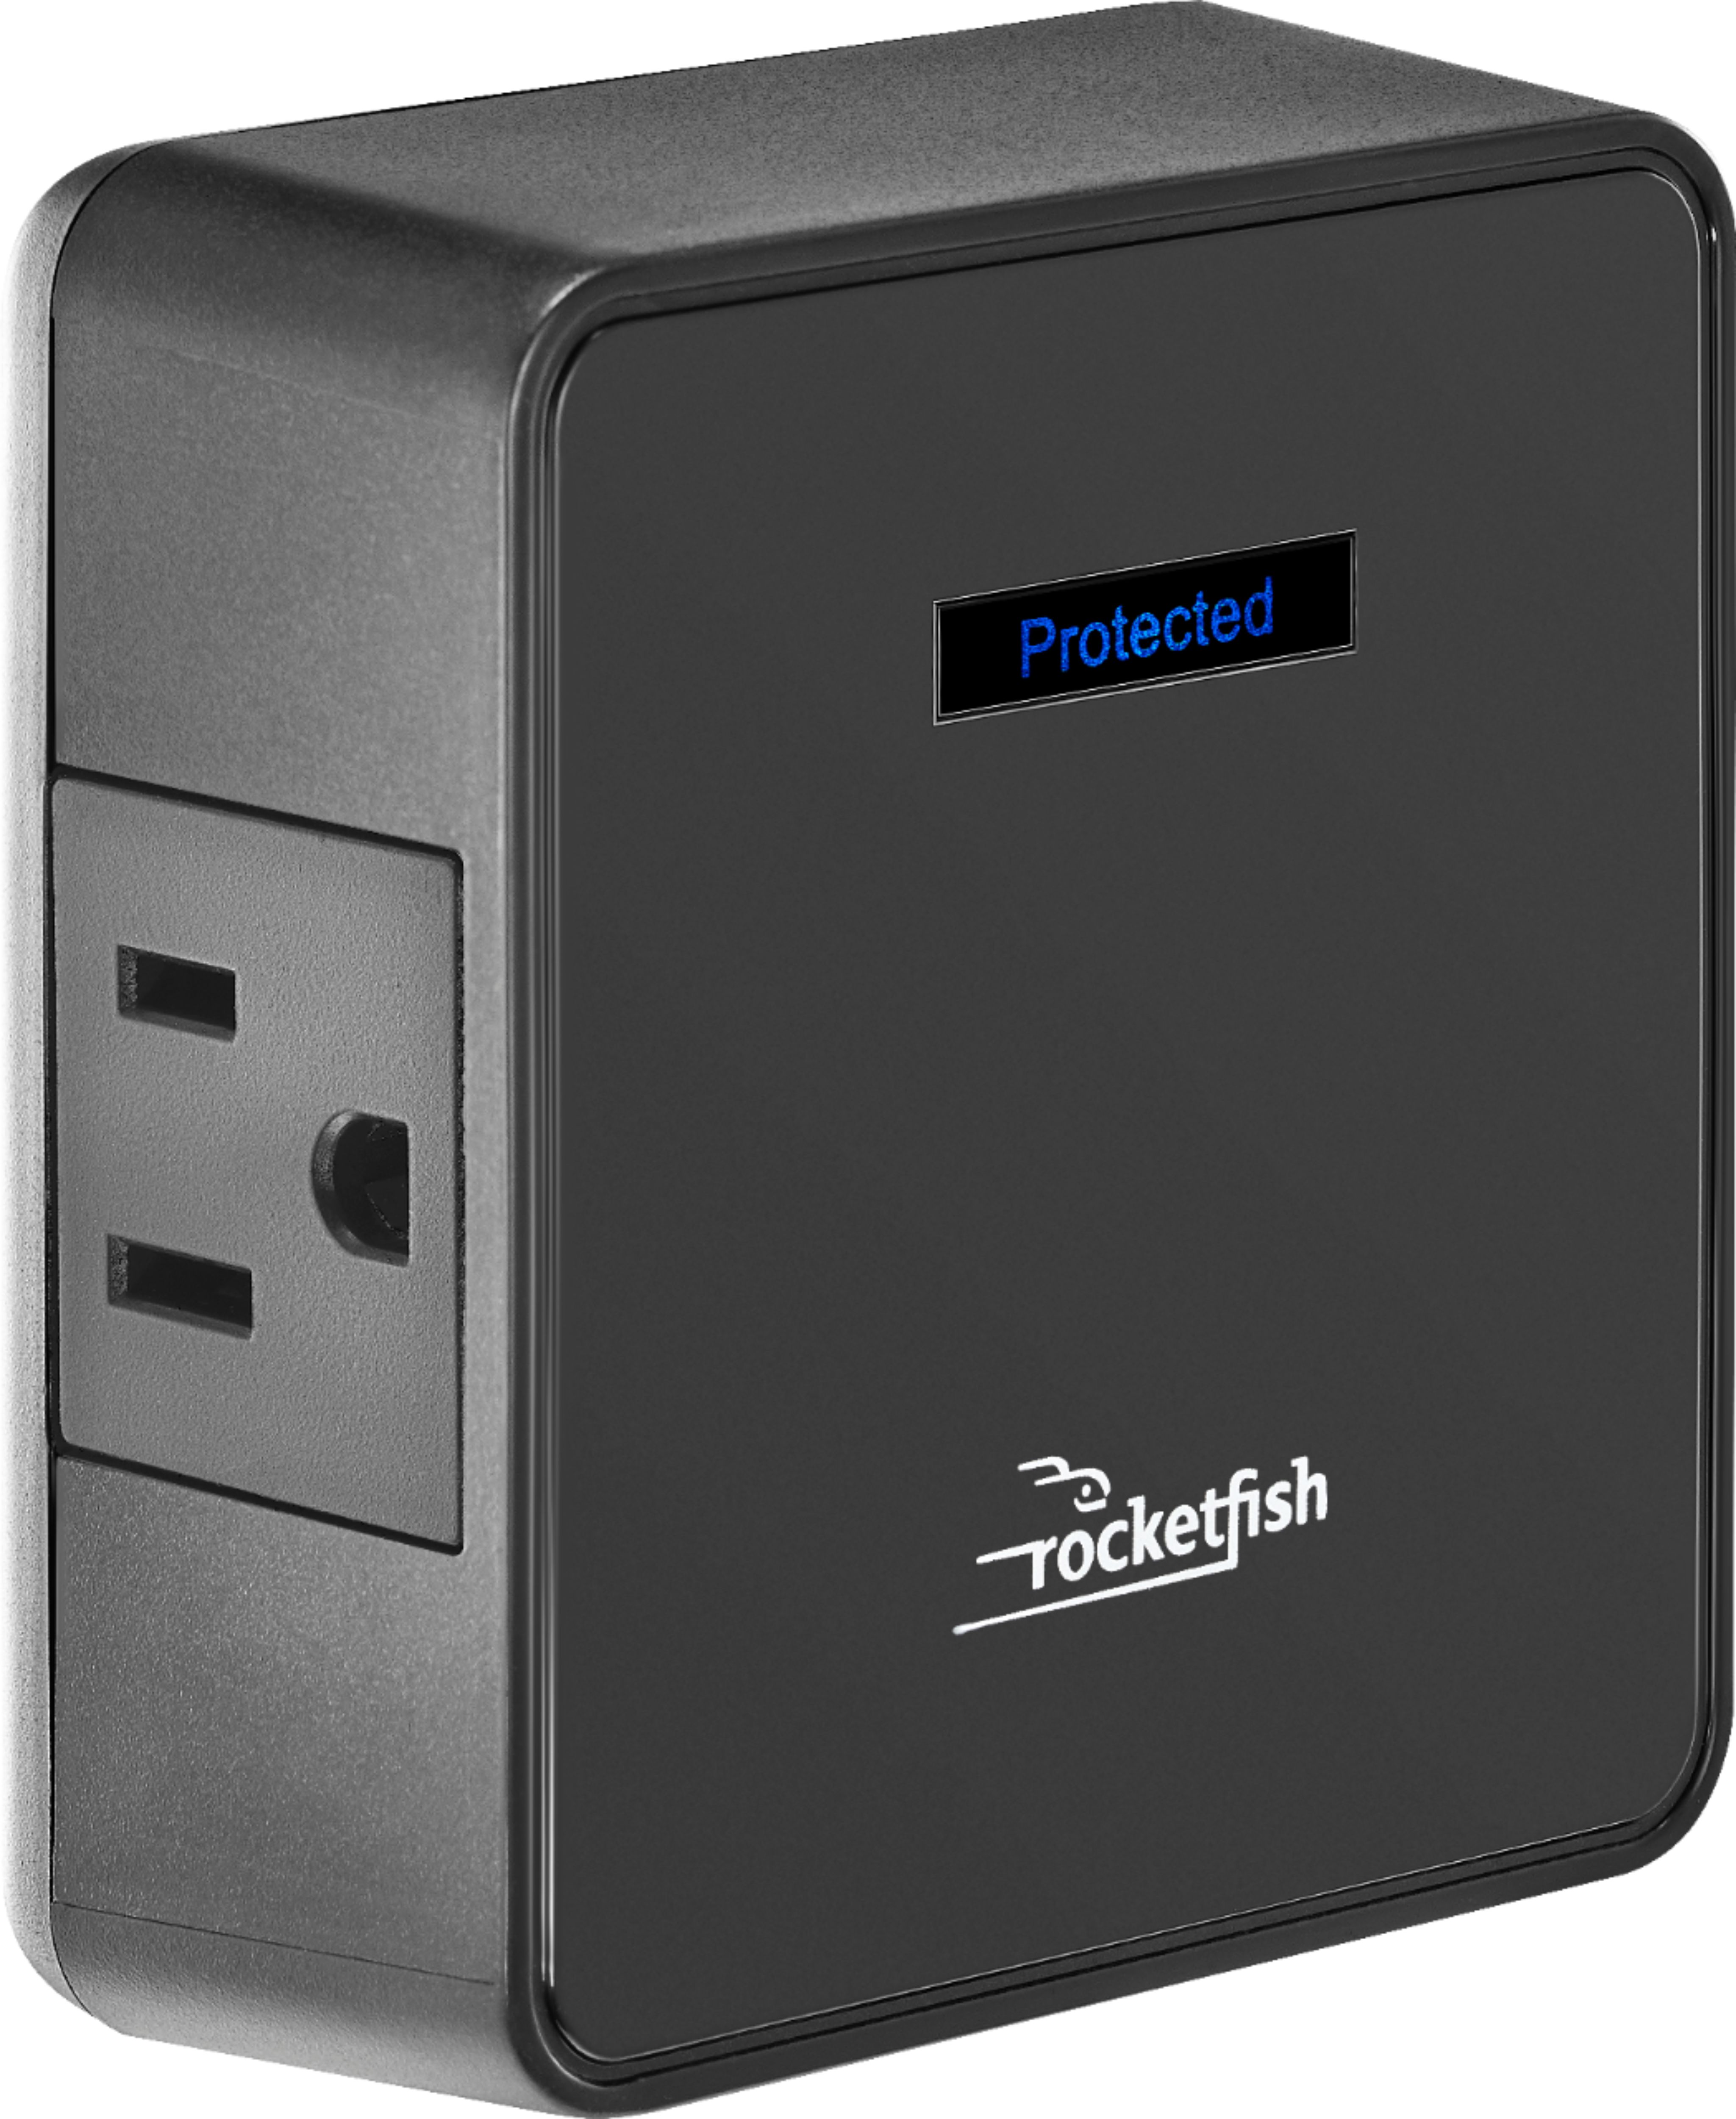 Rocketfish Rf-hts1215 2-Outlet 1500 Joules Surge Protector - Black